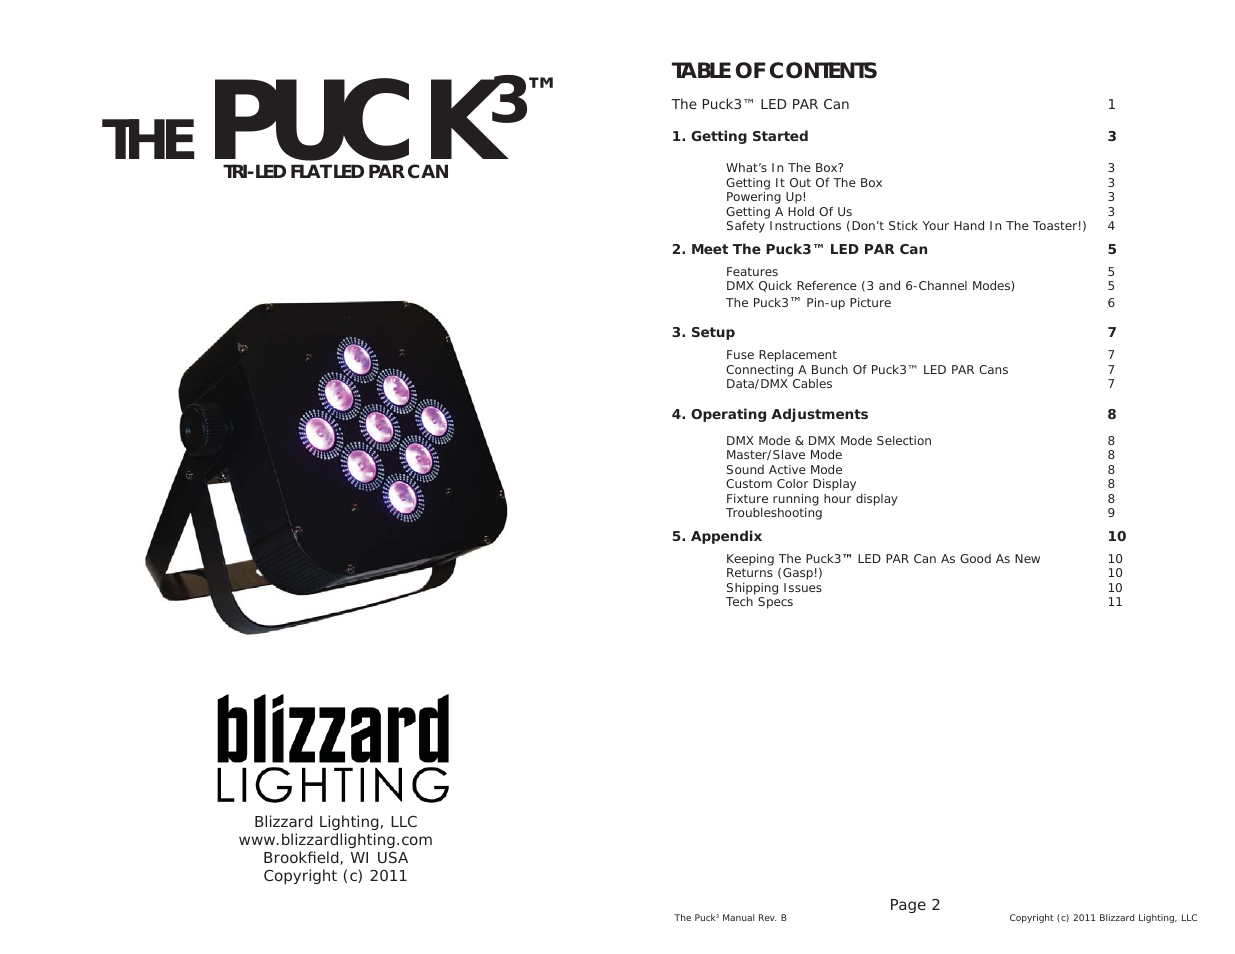 The Puck 3